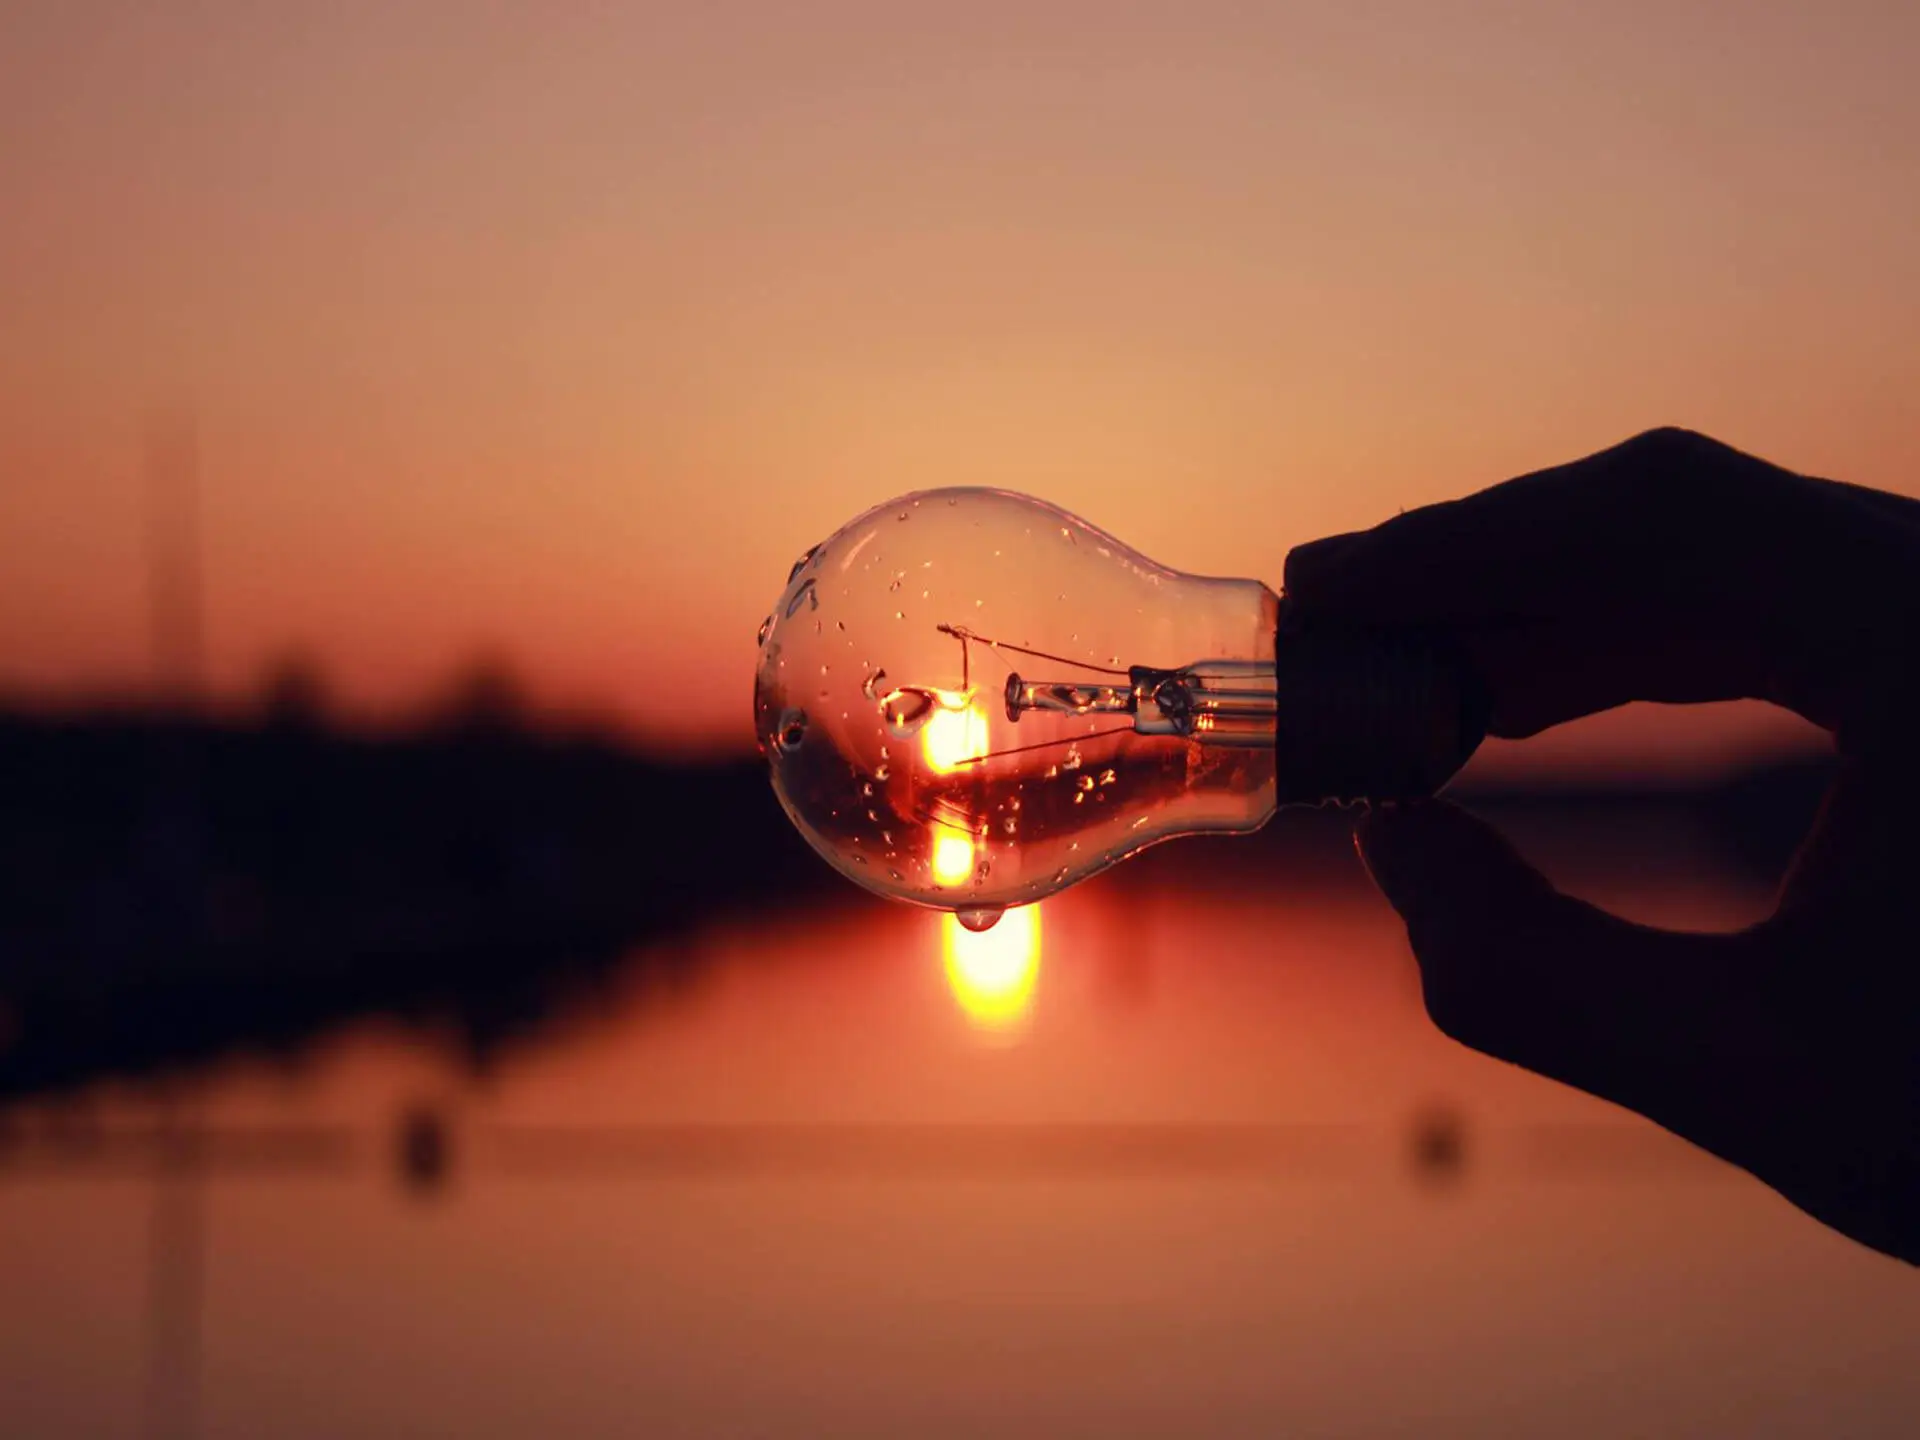 Image of a hand holding a lightbulb suggesting thought leadership.